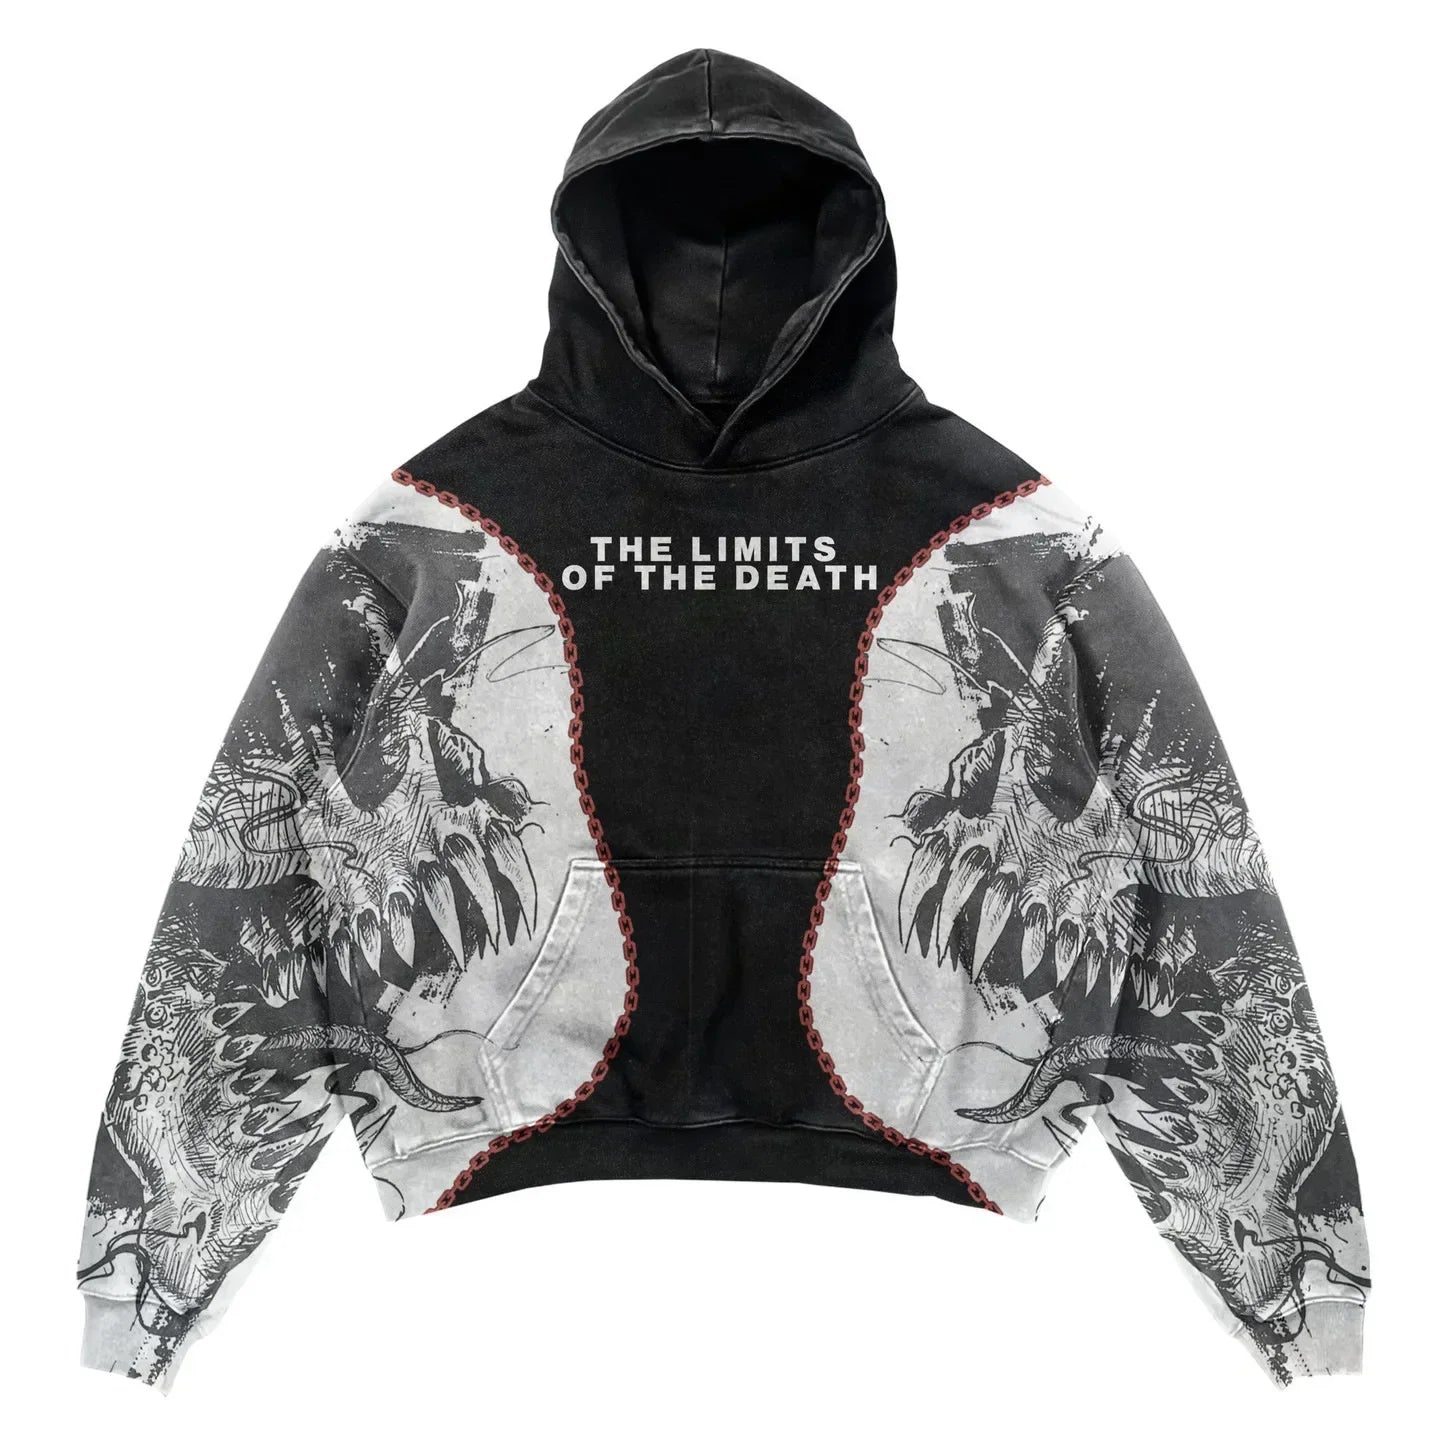 This Maramalive™ Explosions Printed Skull Y2K Retro Hooded Sweater Coat Street Style Gothic Casual Fashion Hooded Sweater Men's Female is a black masterpiece featuring skeletal designs and the text "THE LIMITS OF THE DEATH" on the front. White and red accents highlight the artwork on the sleeves and body, making it perfect for four seasons wear.